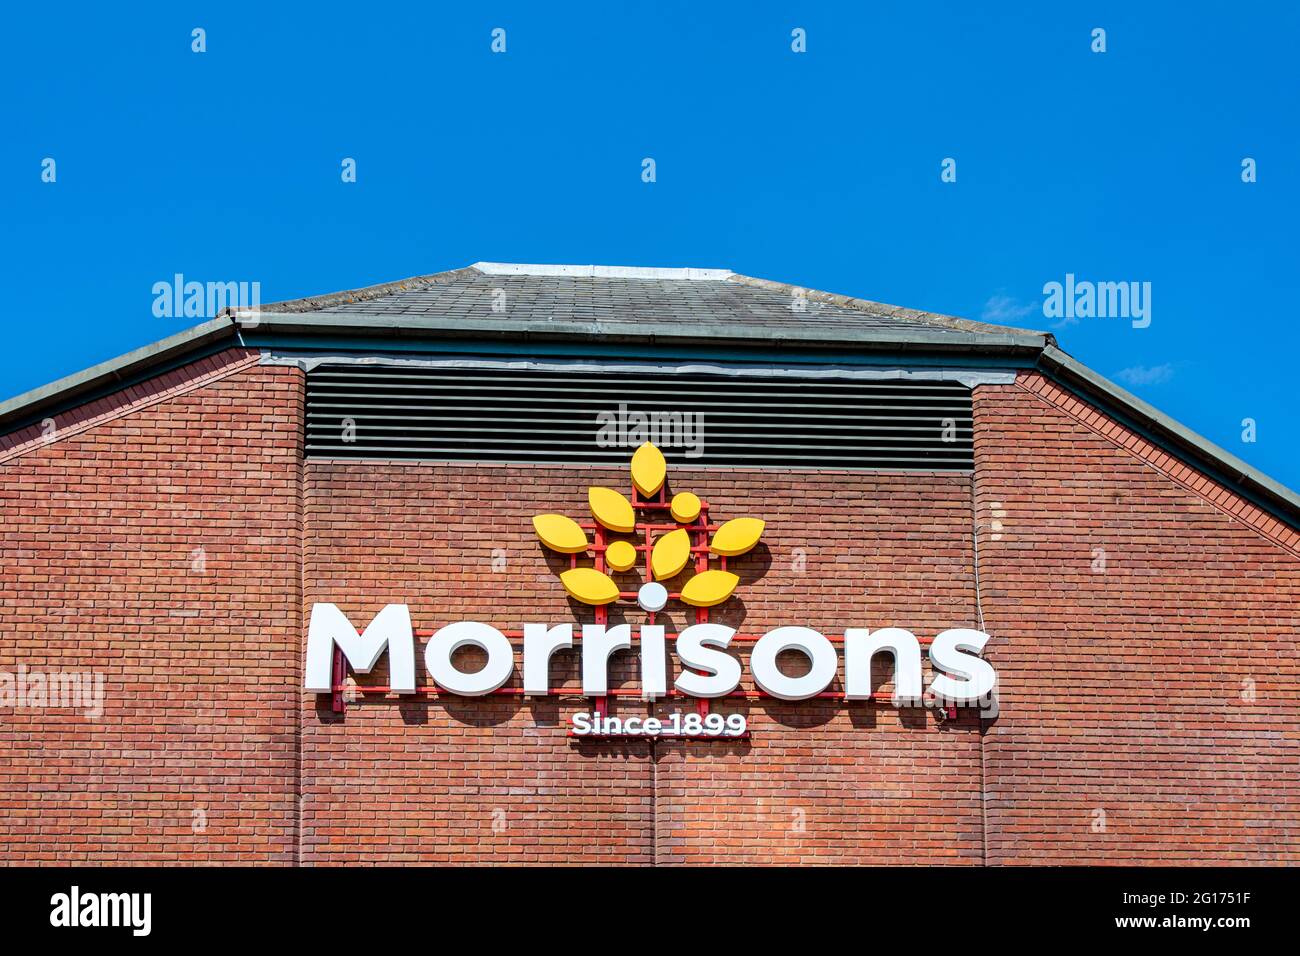 Morrisons since 1899 sign and logo on outside supermarket shop wall UK Stock Photo